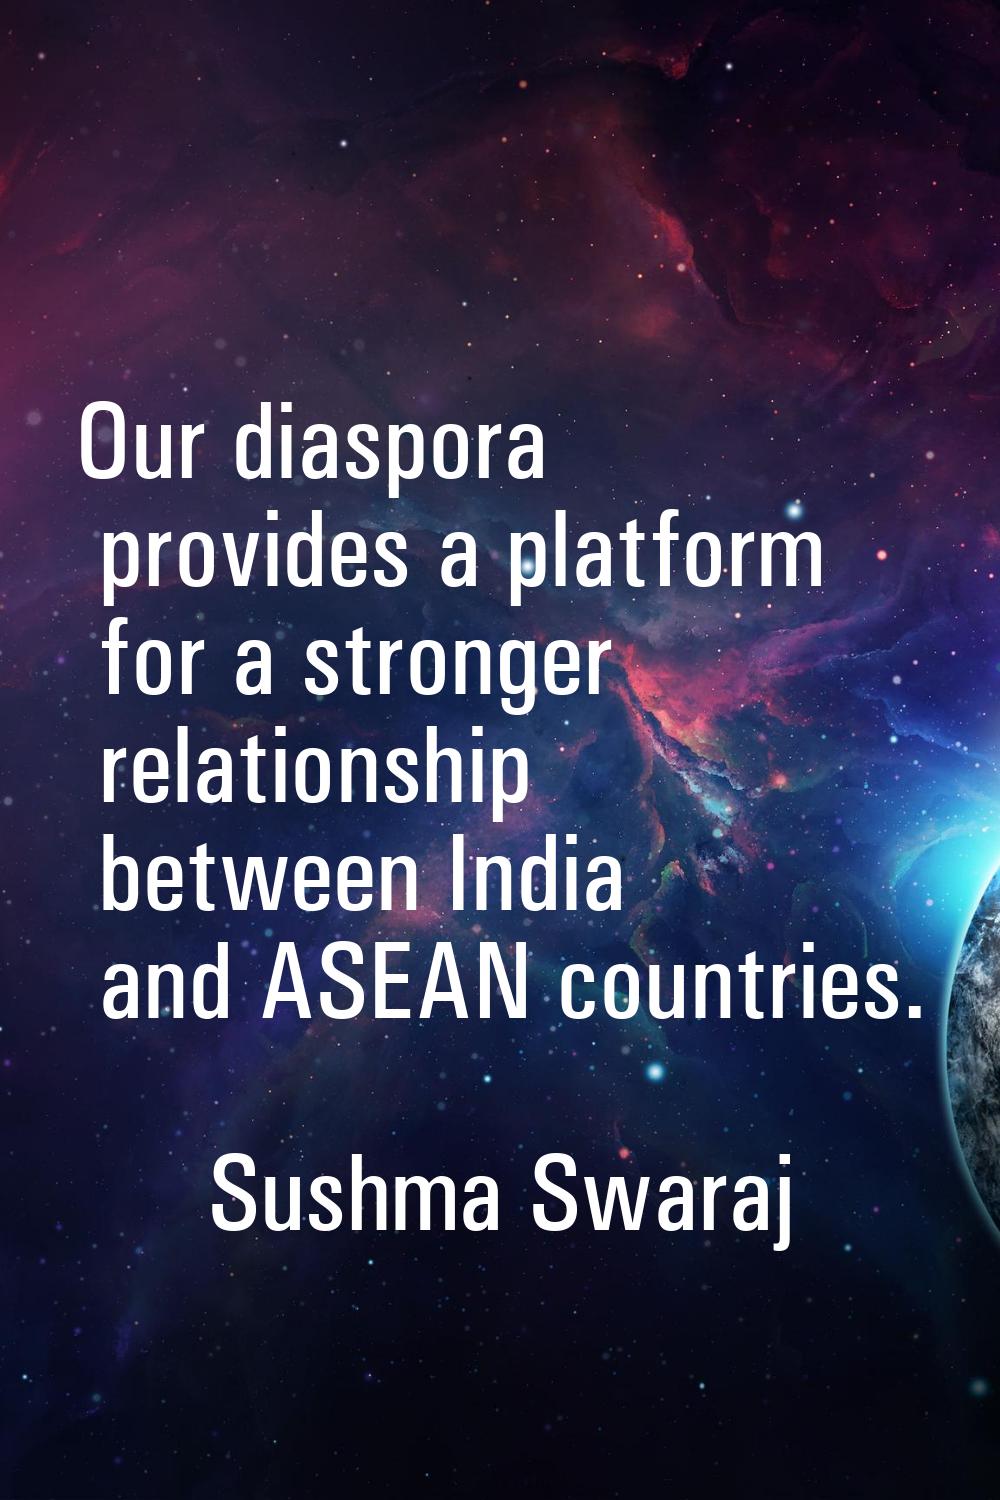 Our diaspora provides a platform for a stronger relationship between India and ASEAN countries.